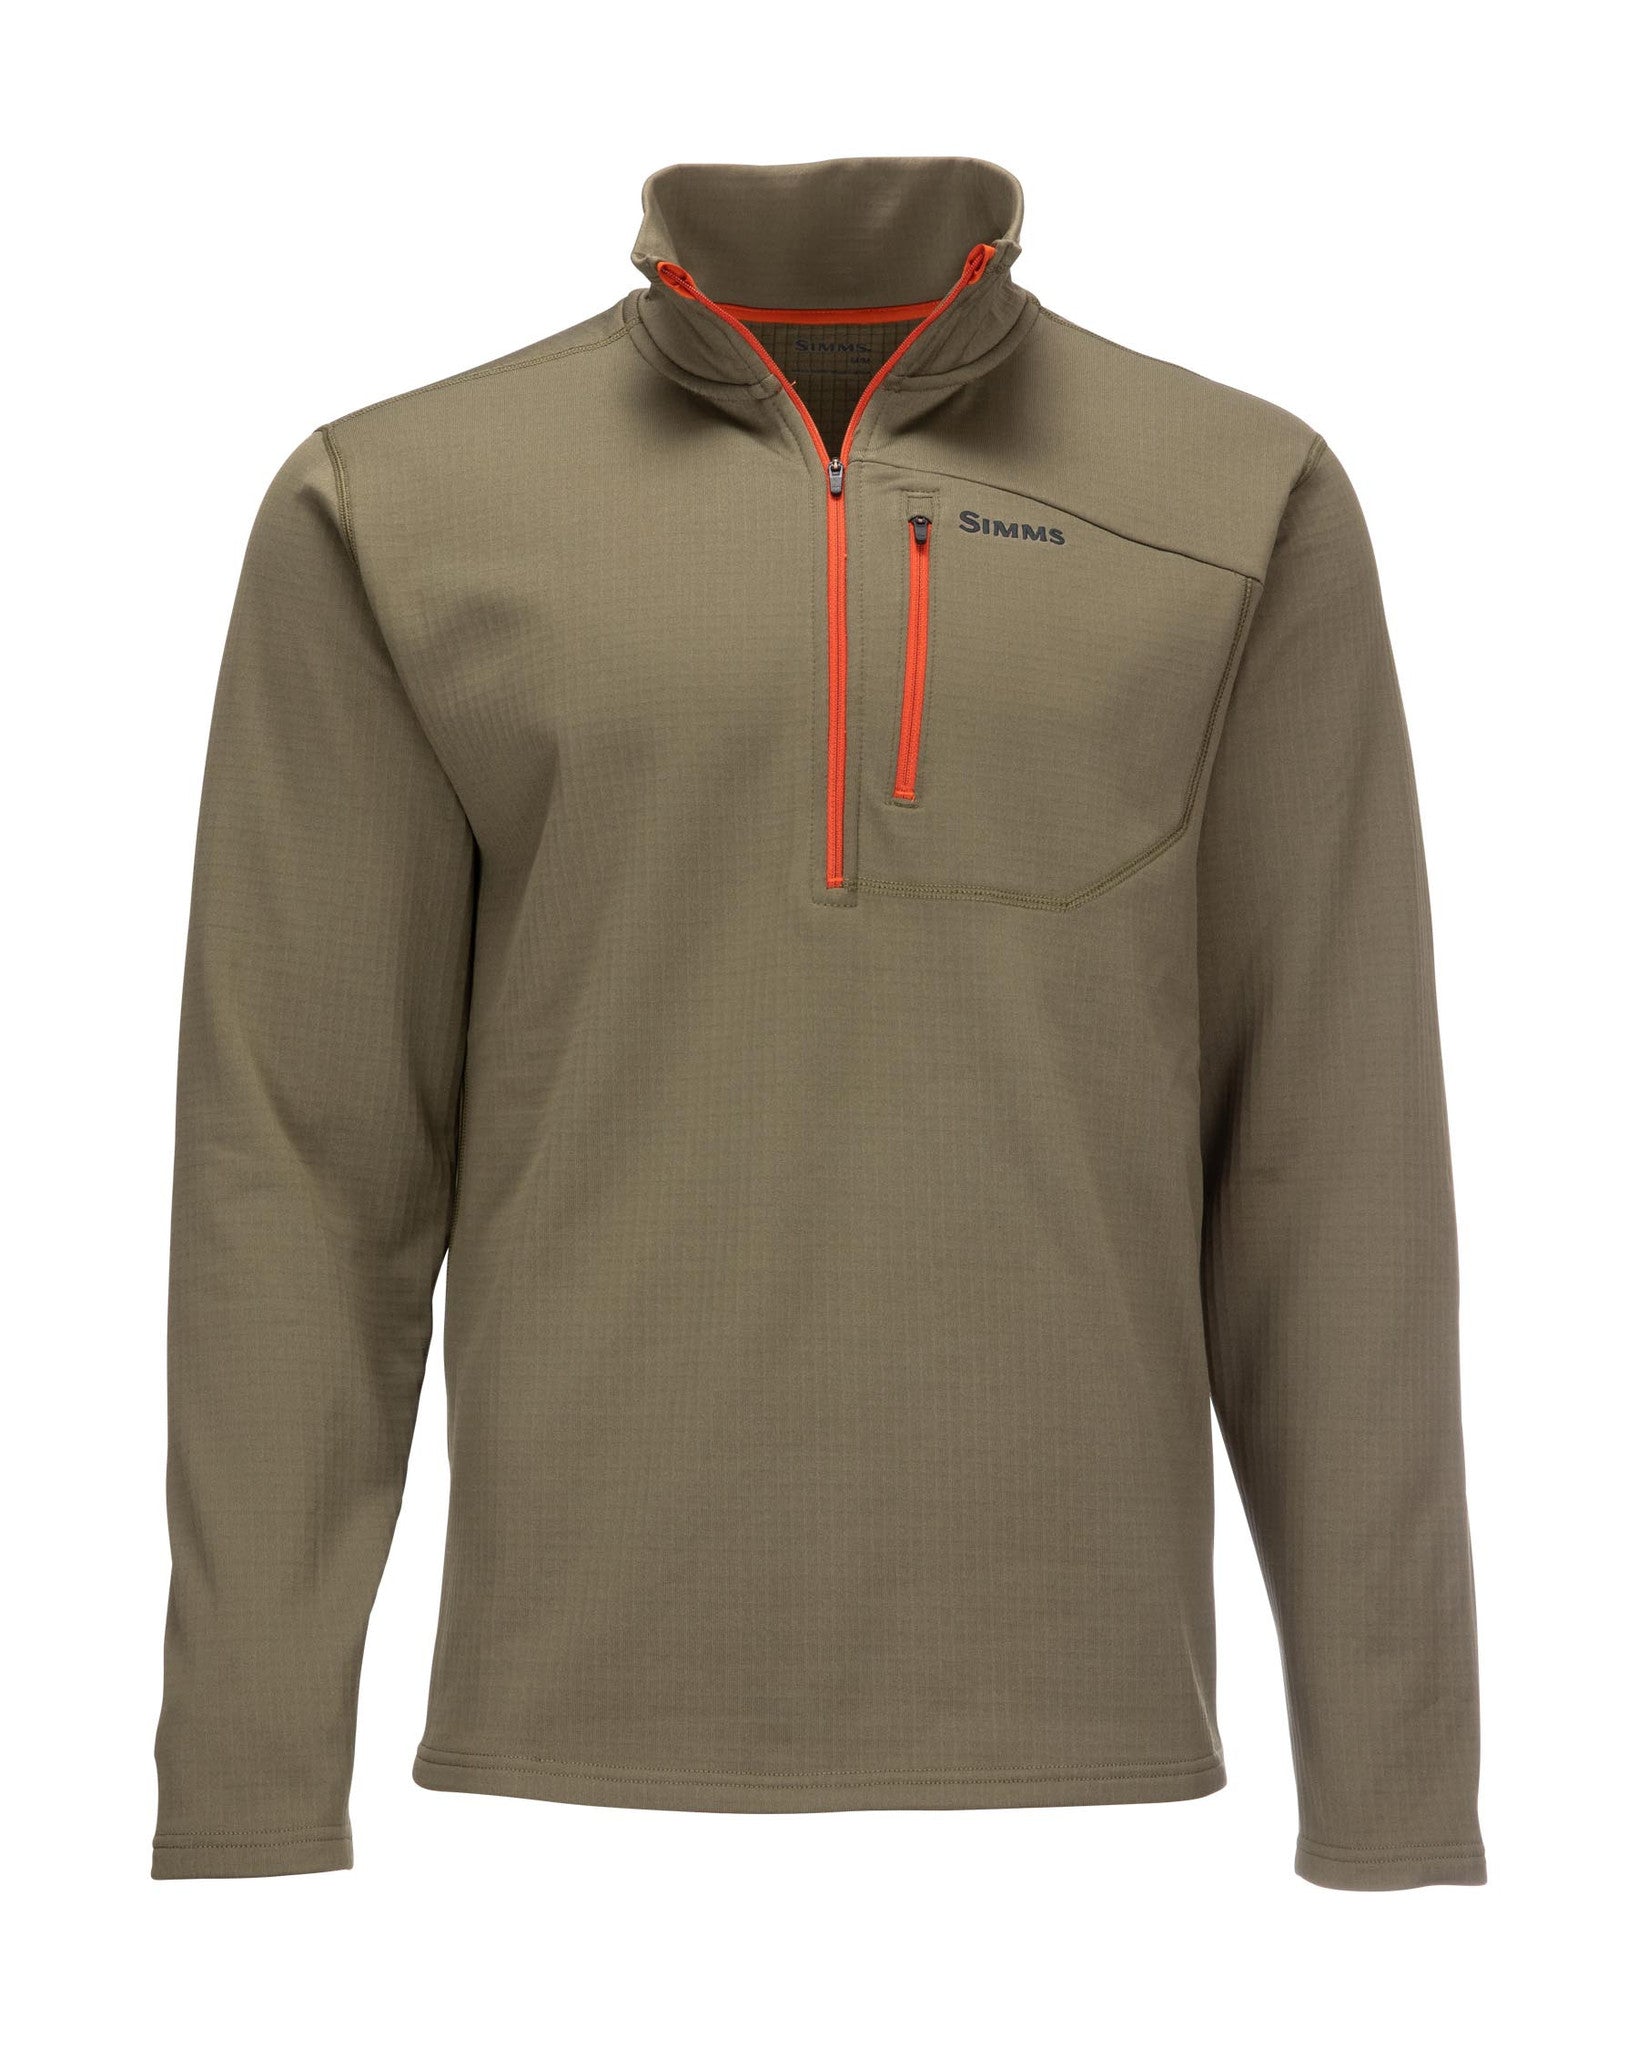 Thermal 1/4 Zip - ( SIMMS) - Blue Quill Angler